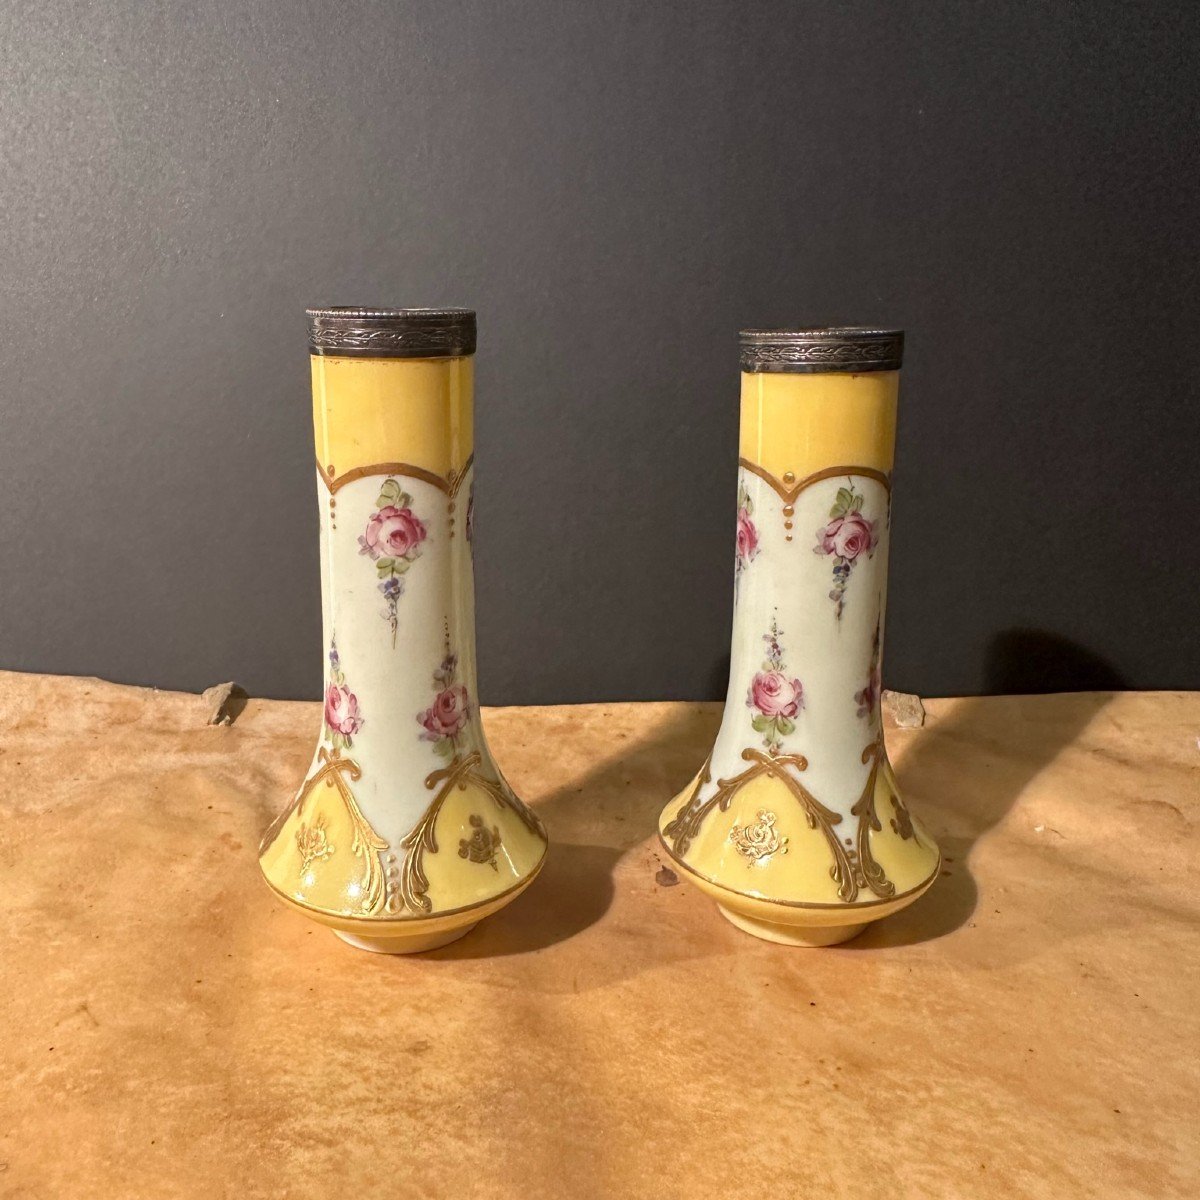 Pair Of 19th Century Porcelain Vases With Marks On The Base